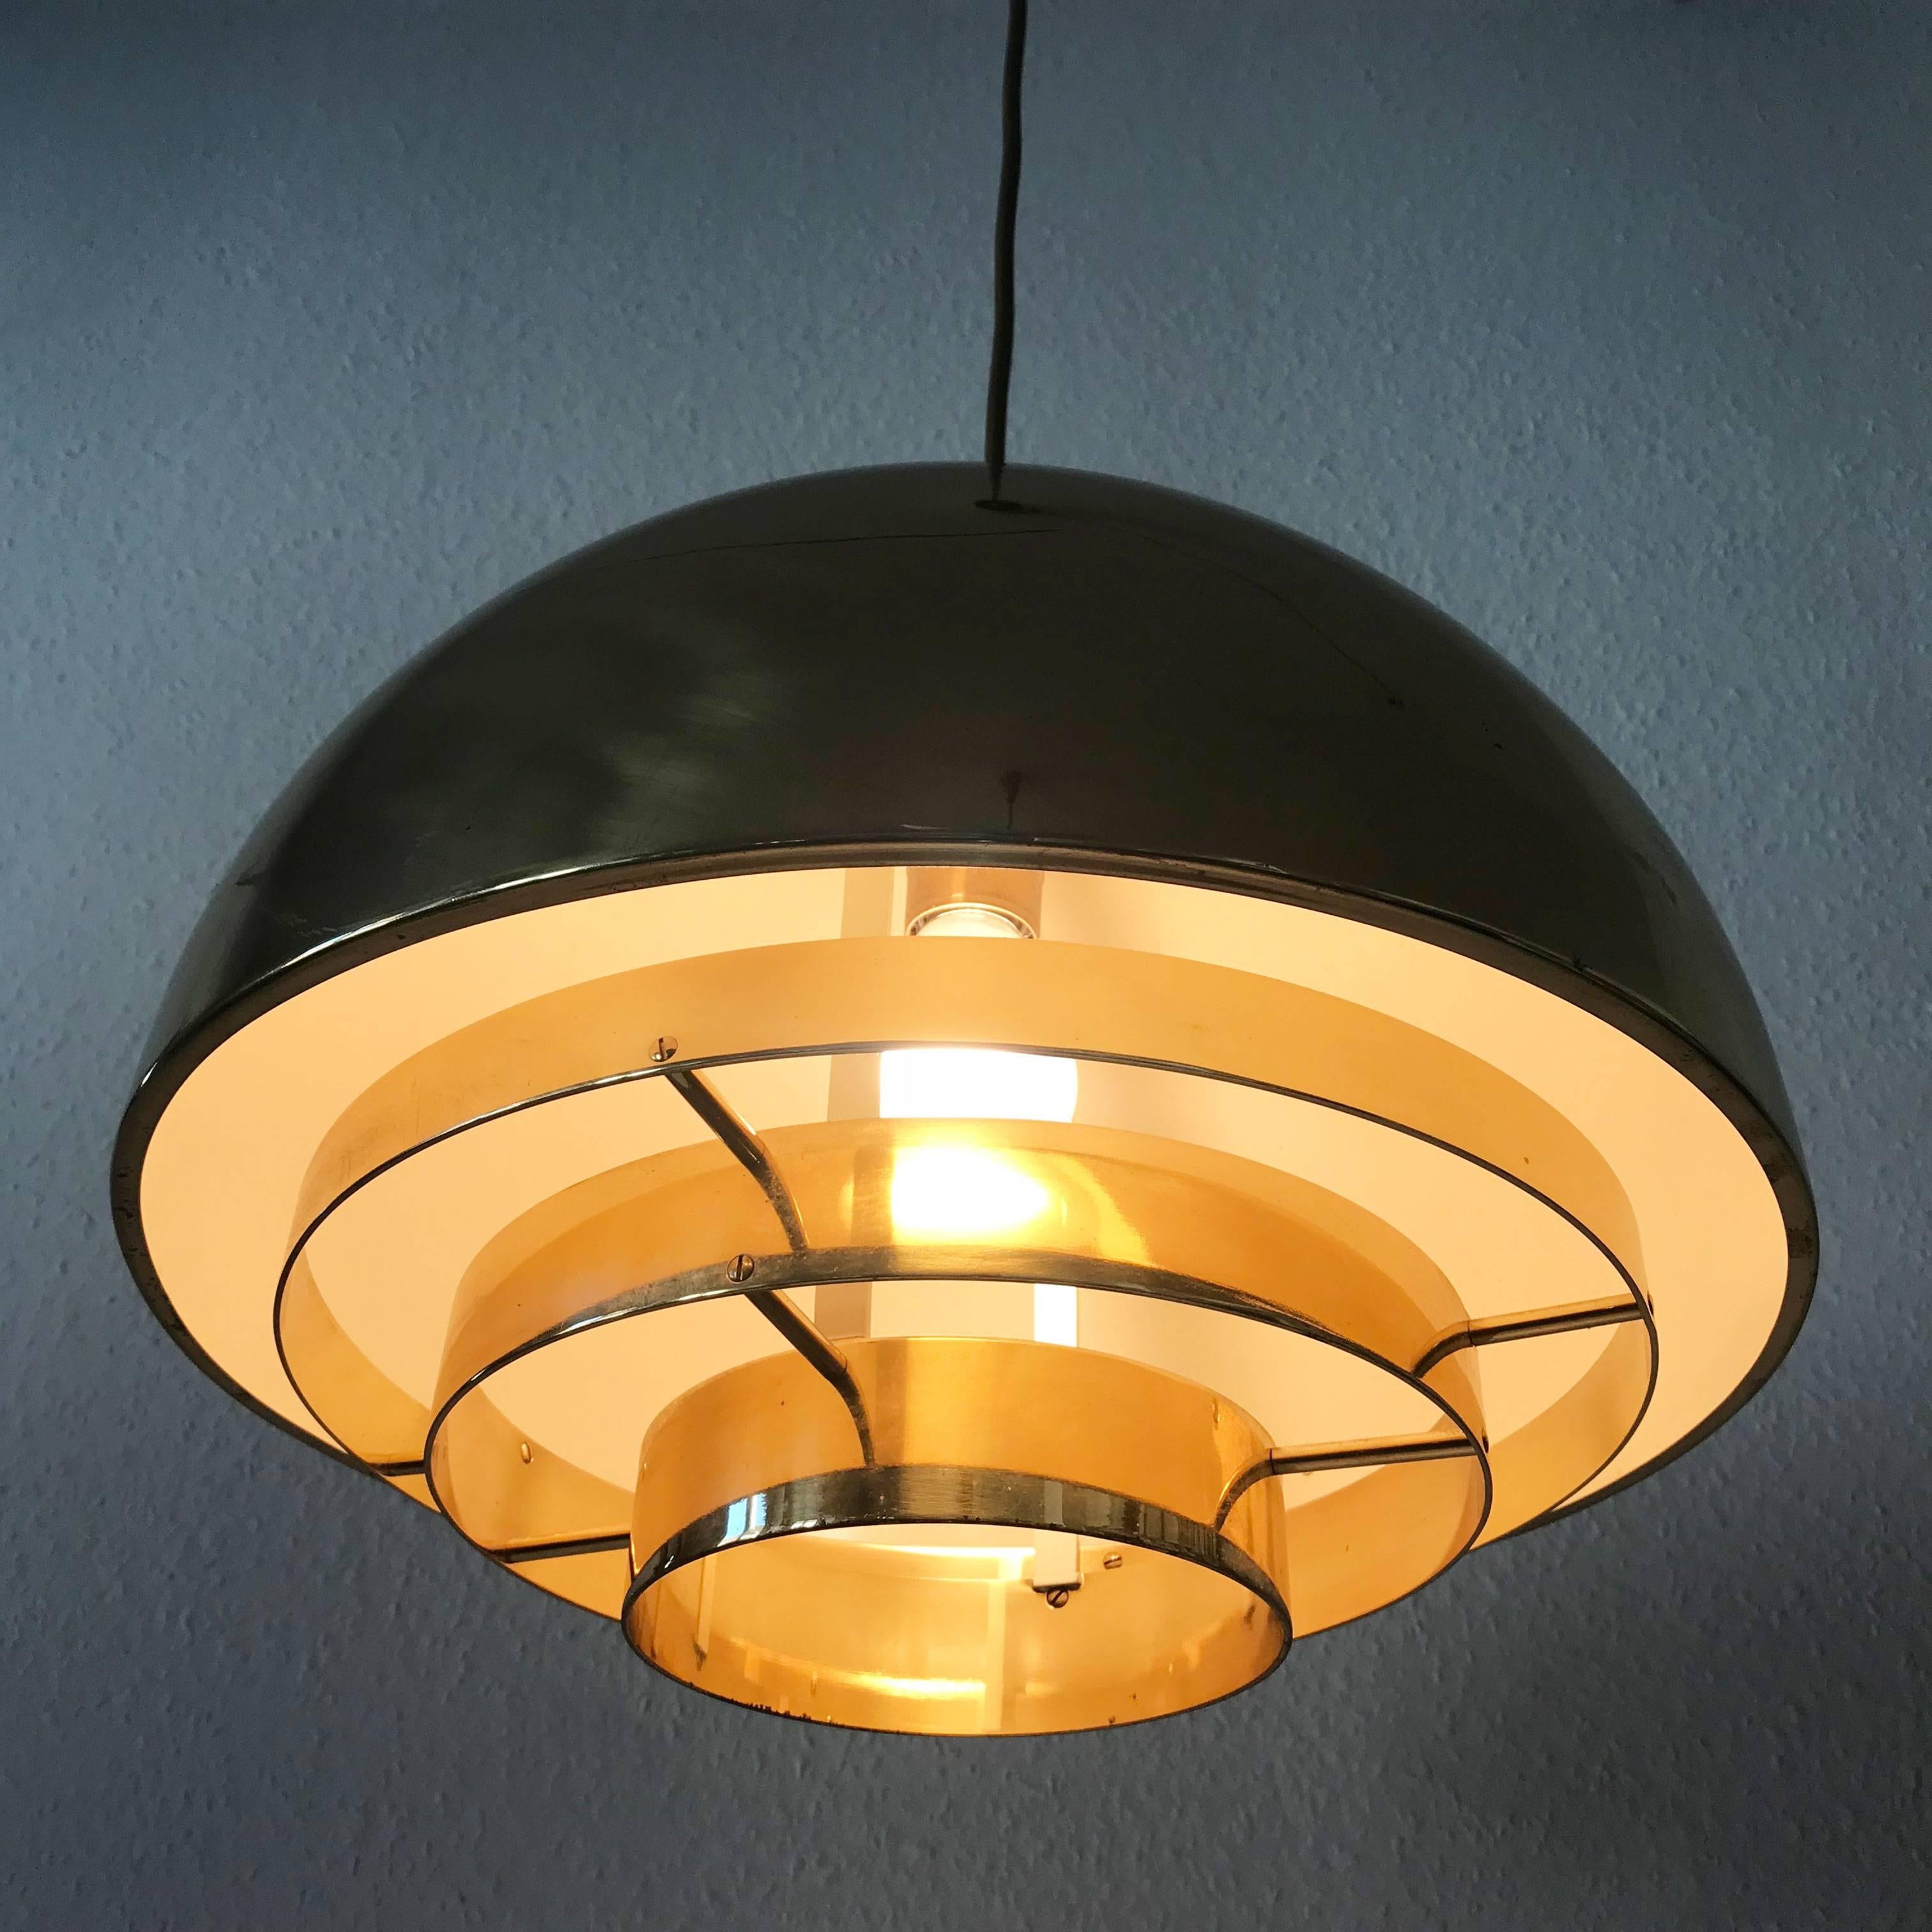 Elegant Mid Century Modern brass pendant lamp or hanging light 'Dome'. Manufactured by Vereinigte Werkstätten Munich, Germany, 1960s. 

Executed in massive brass sheet, the pendant lamp needs 1 x E27 E26 Edison screw fit bulb.  It is wired, in